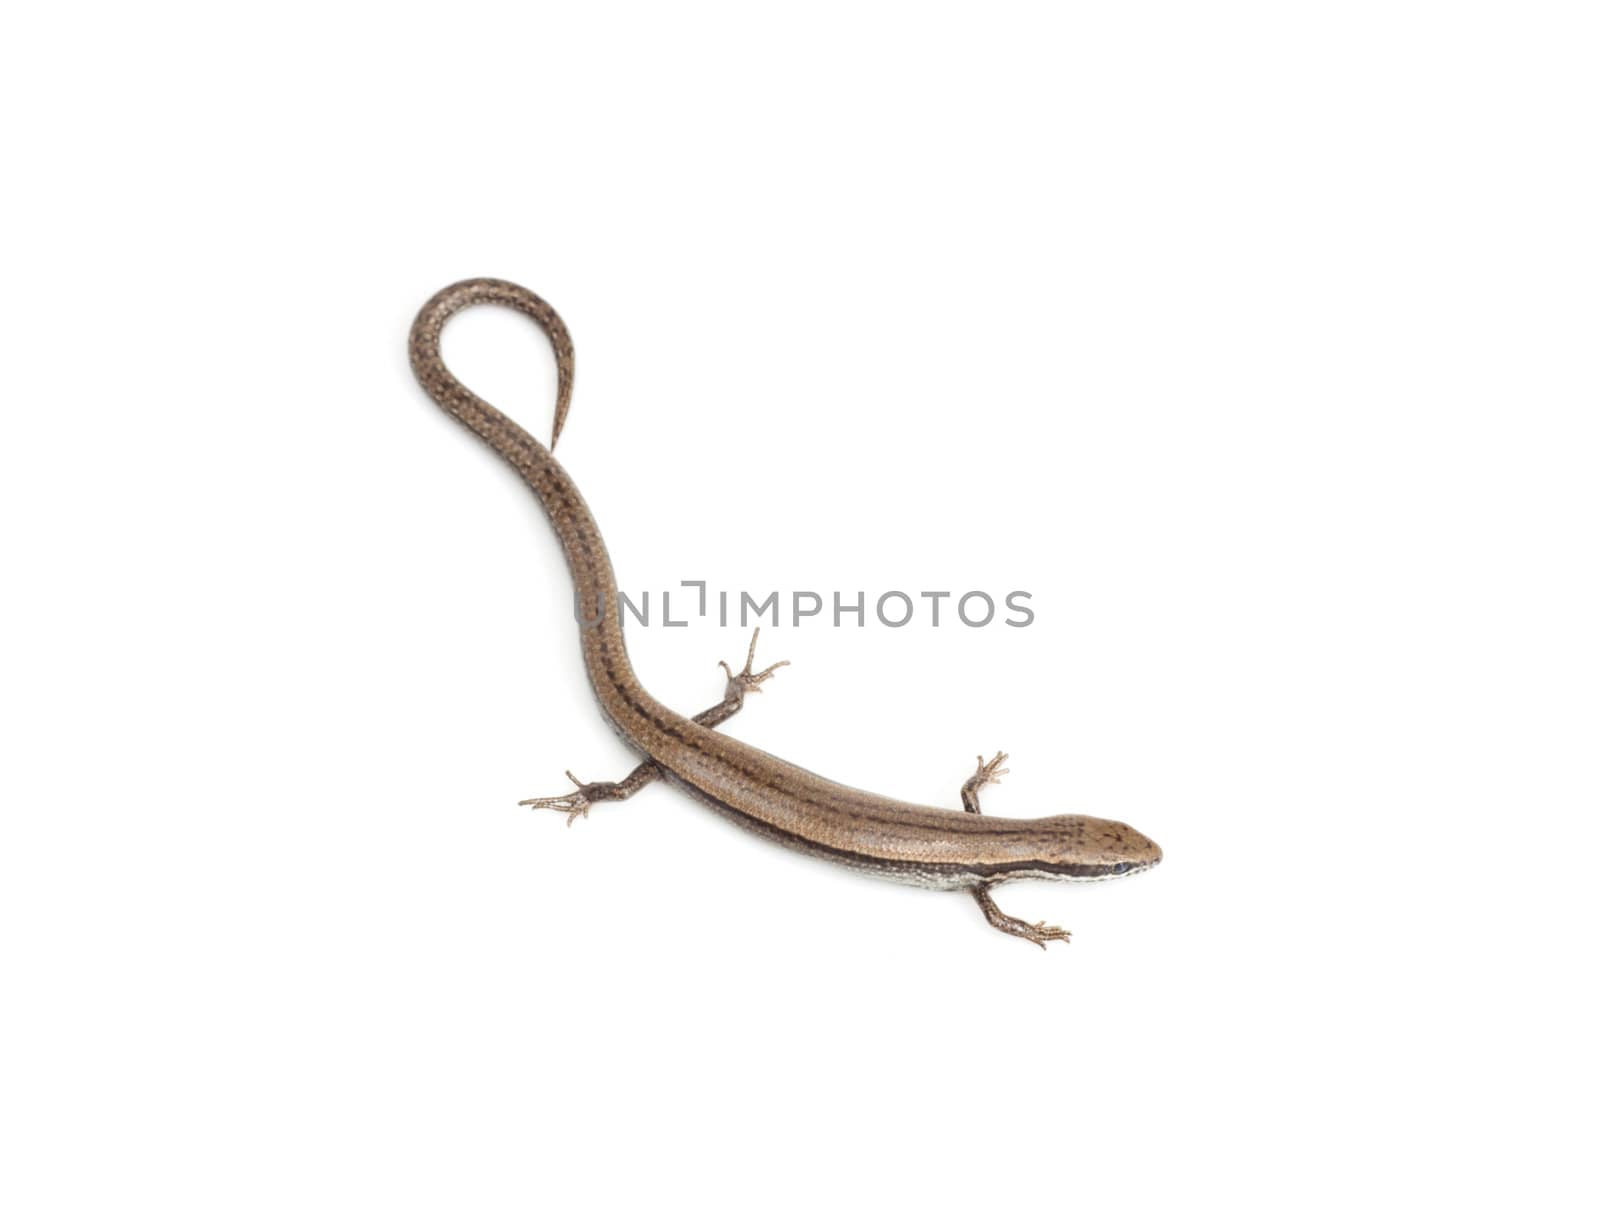 One small lizard on a white background  by schankz